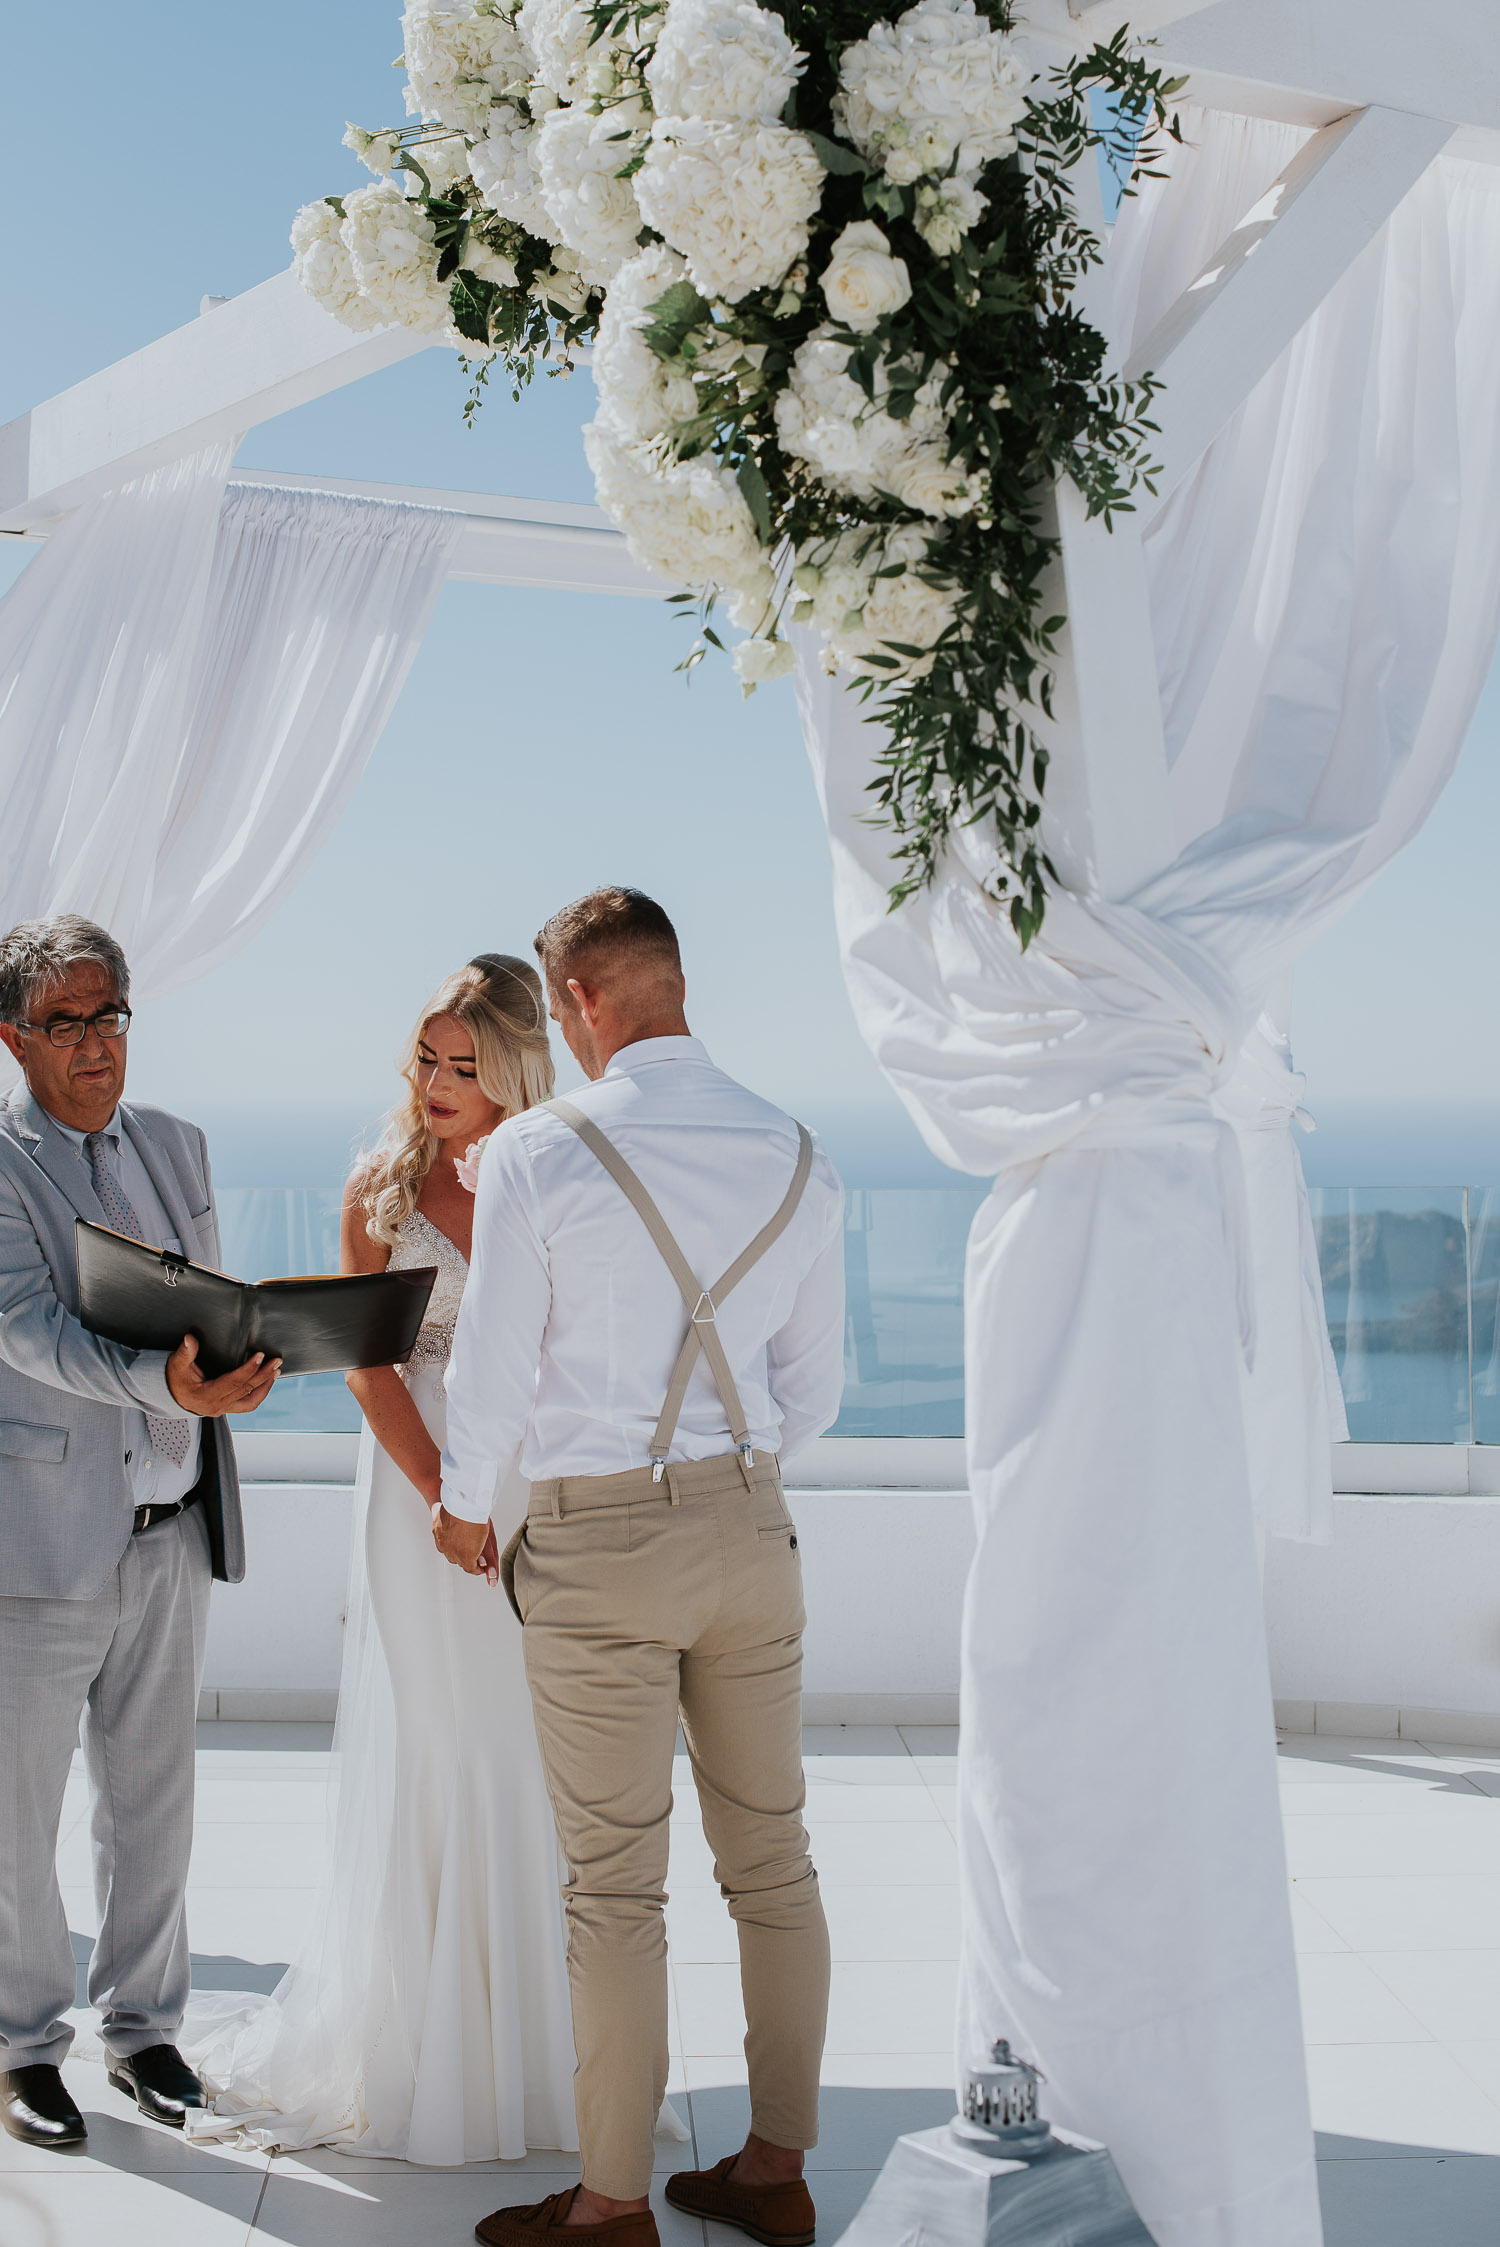 Wedding photographer Santorini: bride and groom holding hands as she reads vows  in front of gazebo by Ben and Vesna.